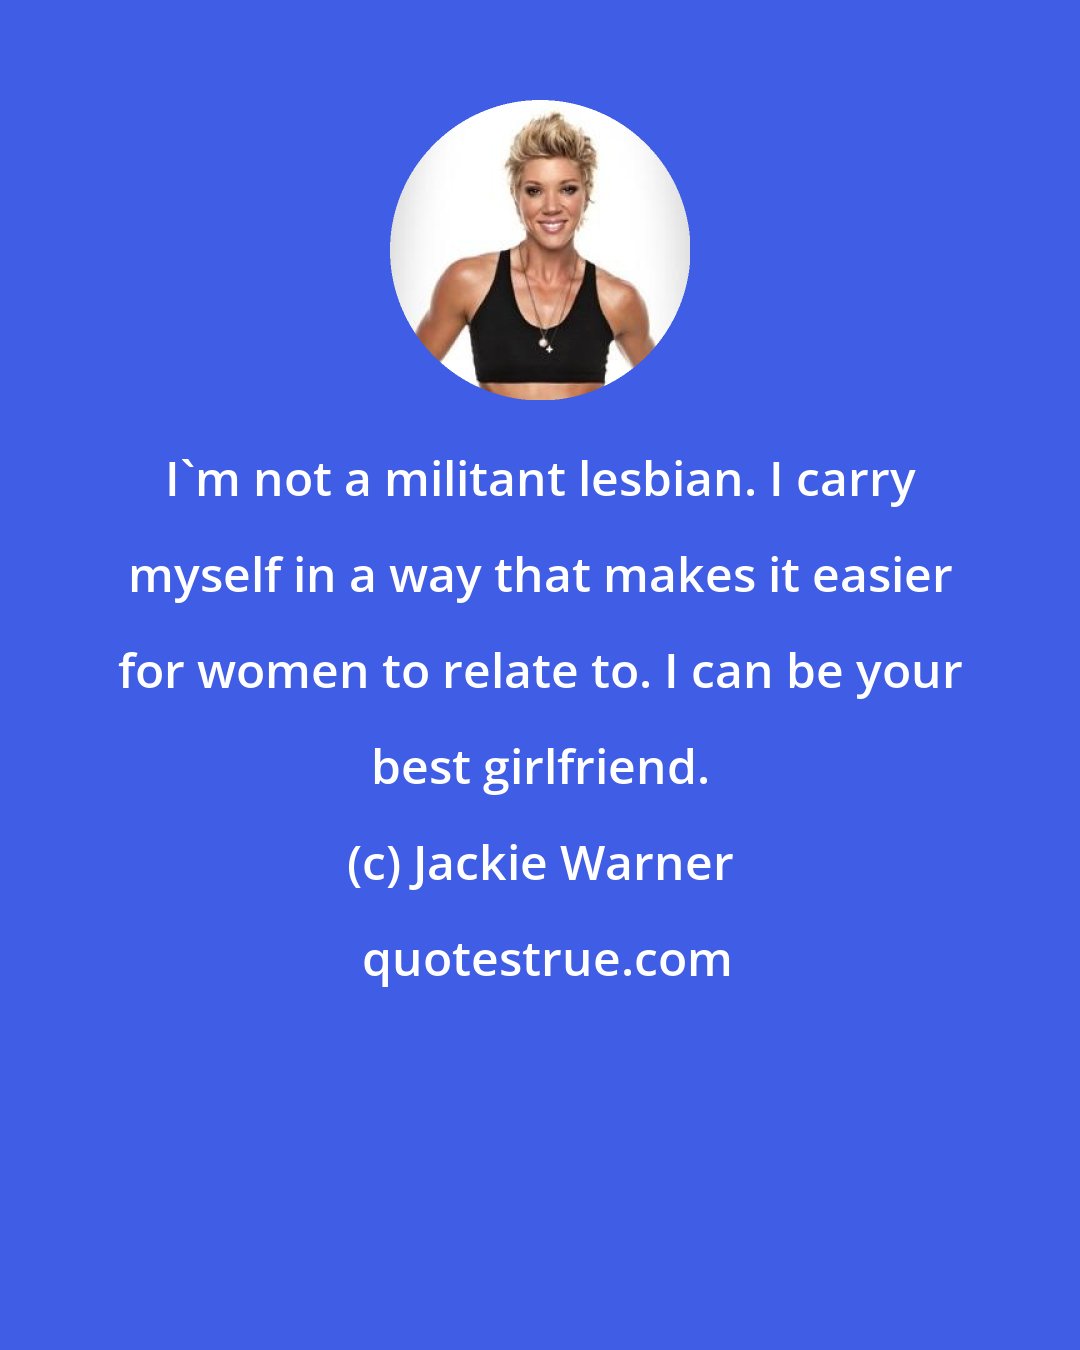 Jackie Warner: I'm not a militant lesbian. I carry myself in a way that makes it easier for women to relate to. I can be your best girlfriend.